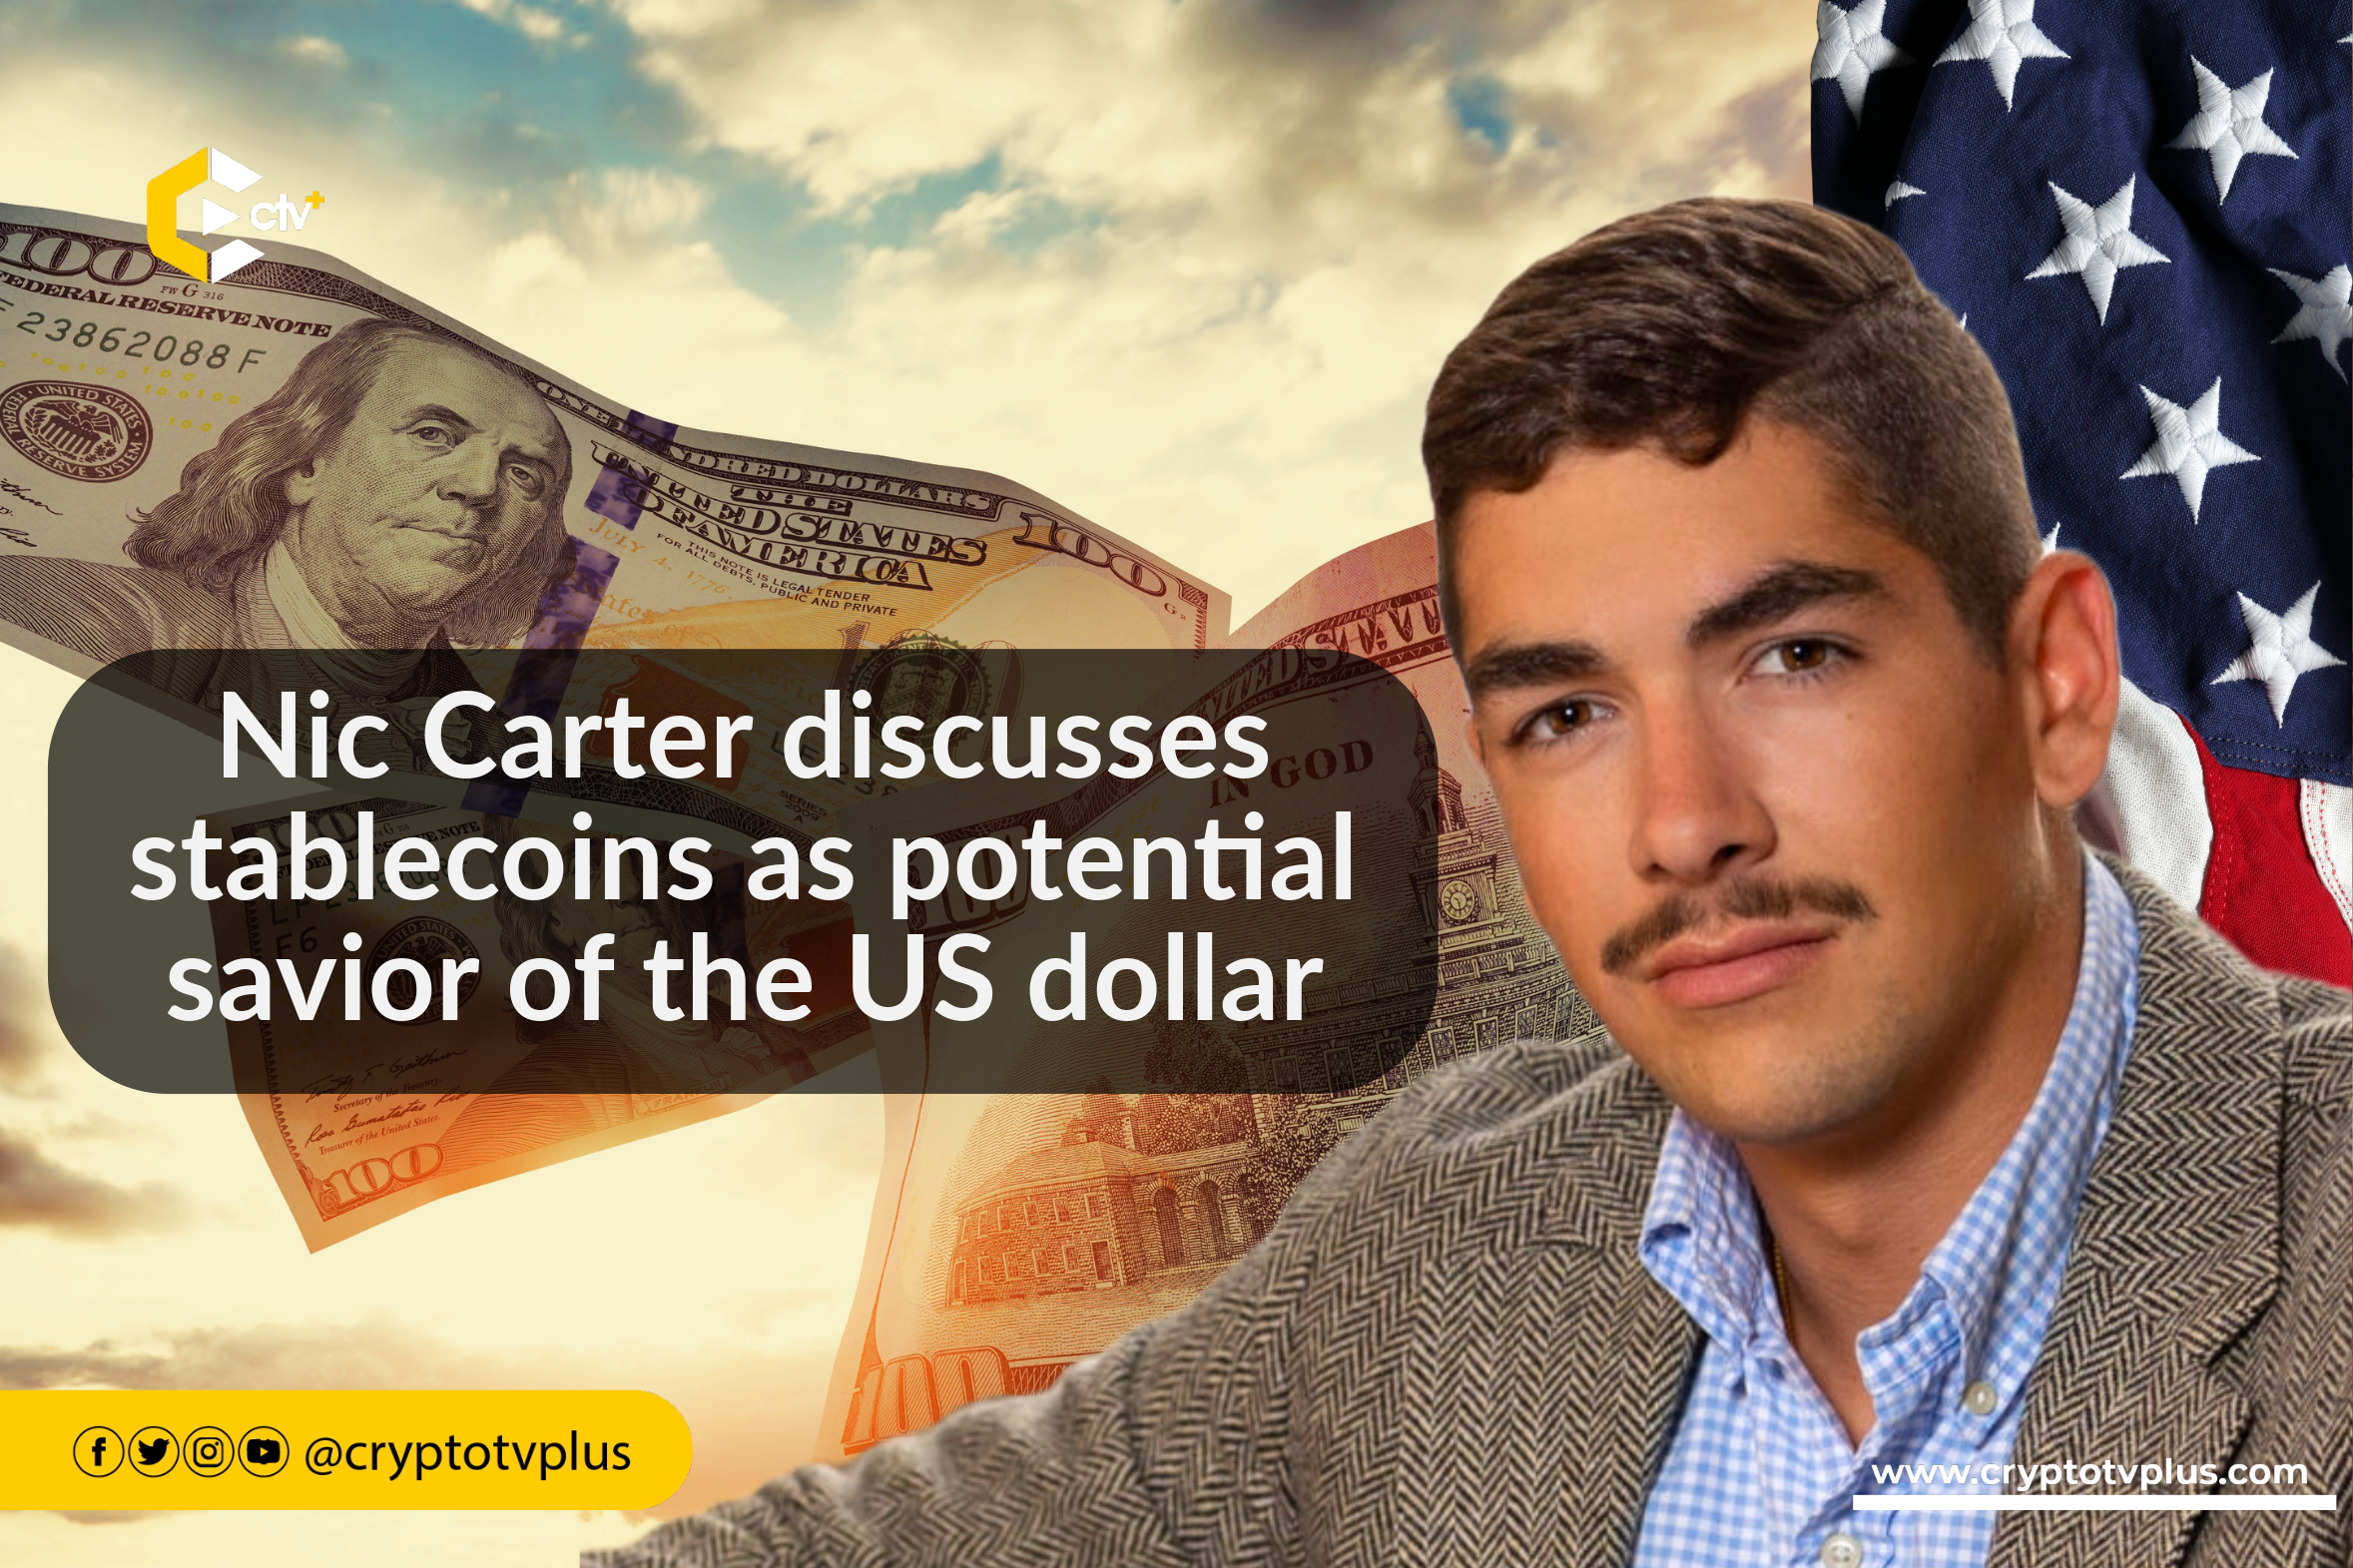 Nic Carter discusses stablecoins as potential savior of the US dollar.